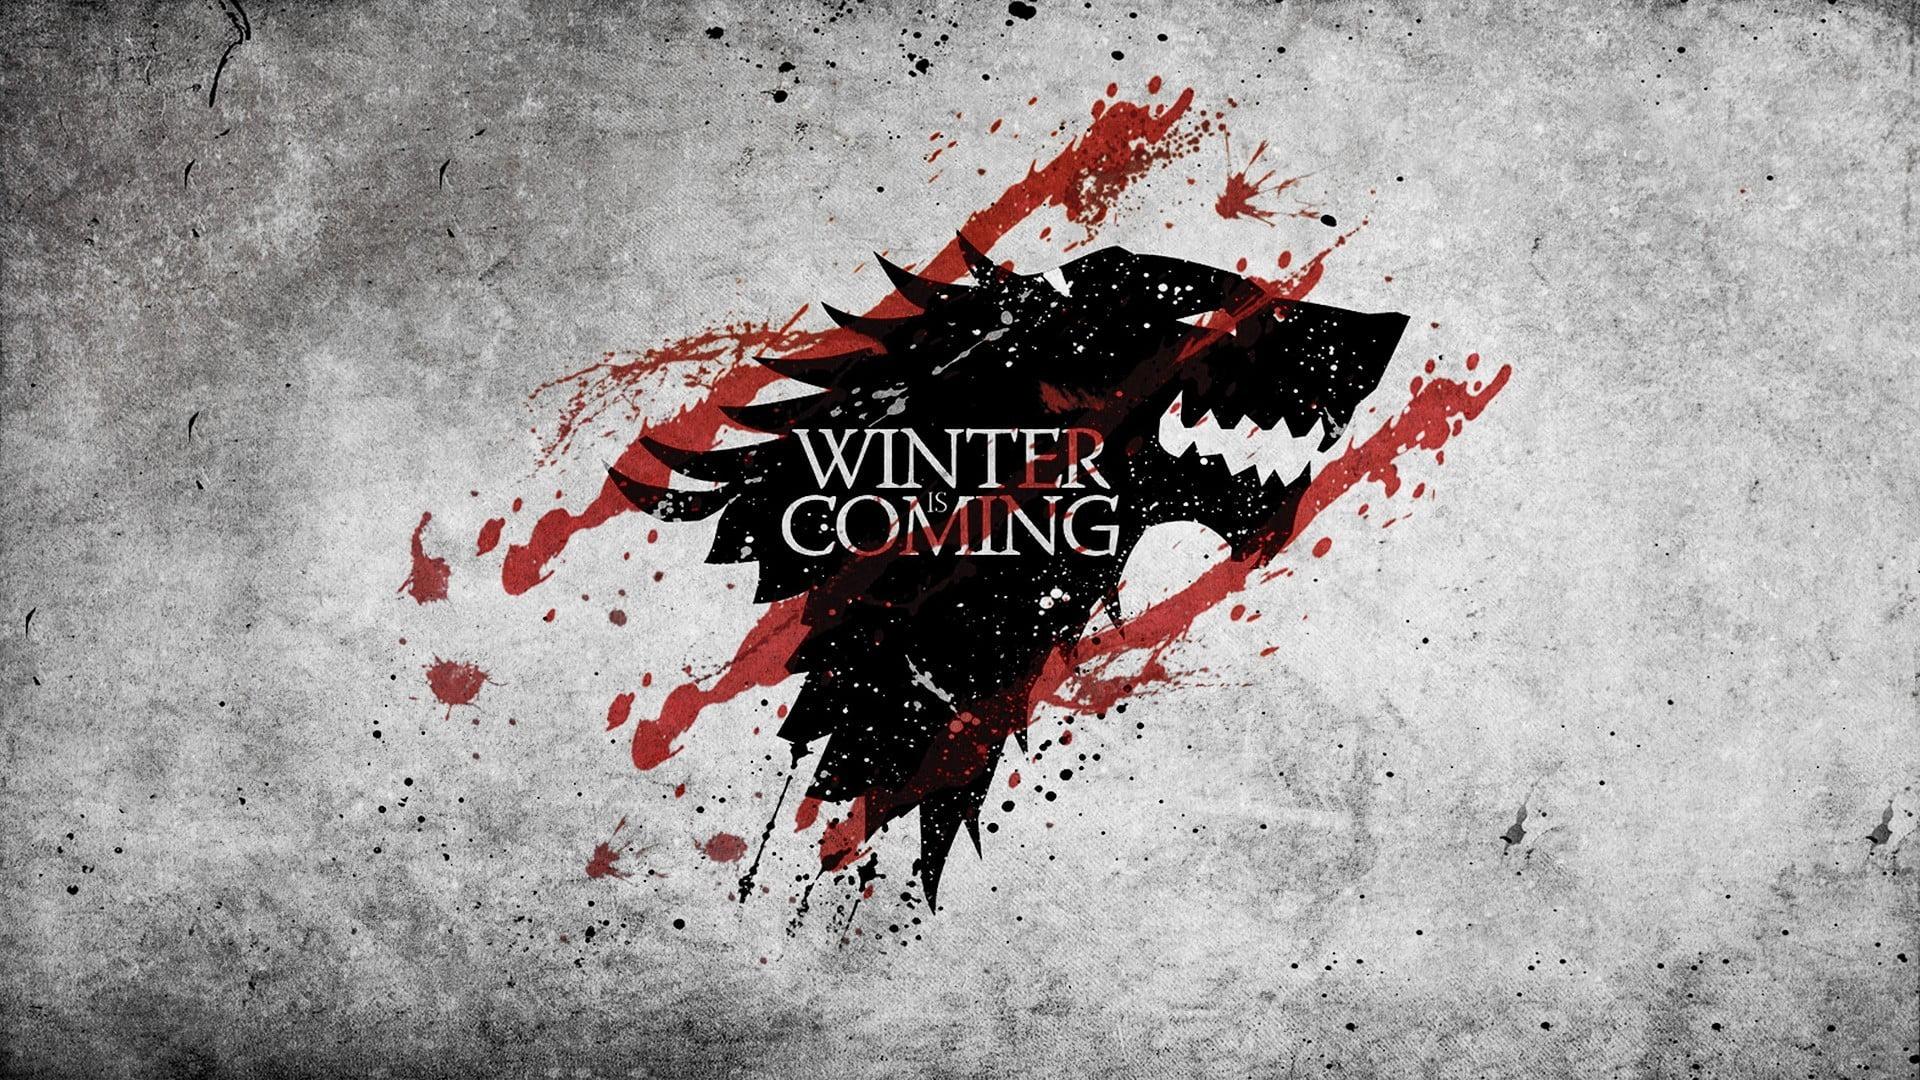 Winter is Coming game of thrones House Stark logo, Game